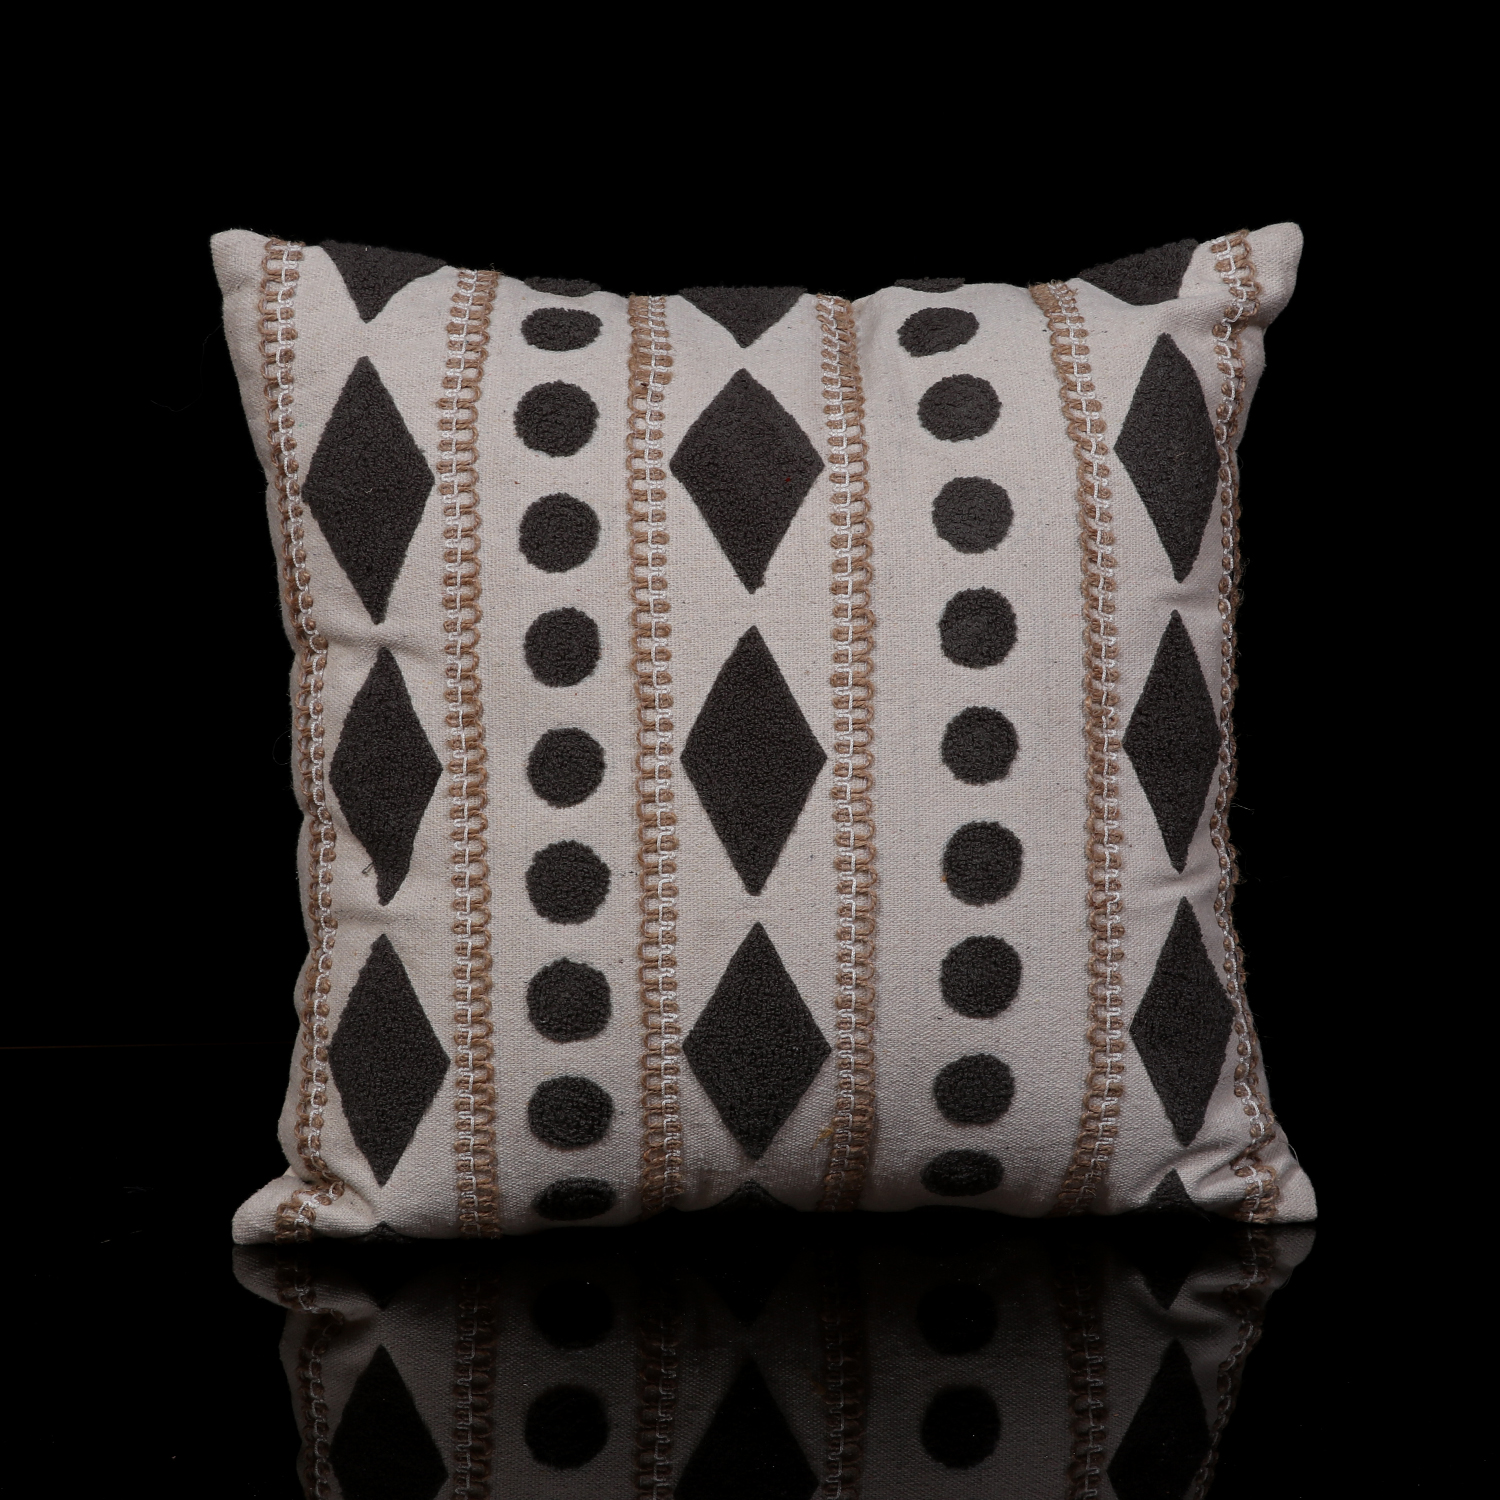 EMBROIDERED GEOMETRIC DESIGN PILLOW